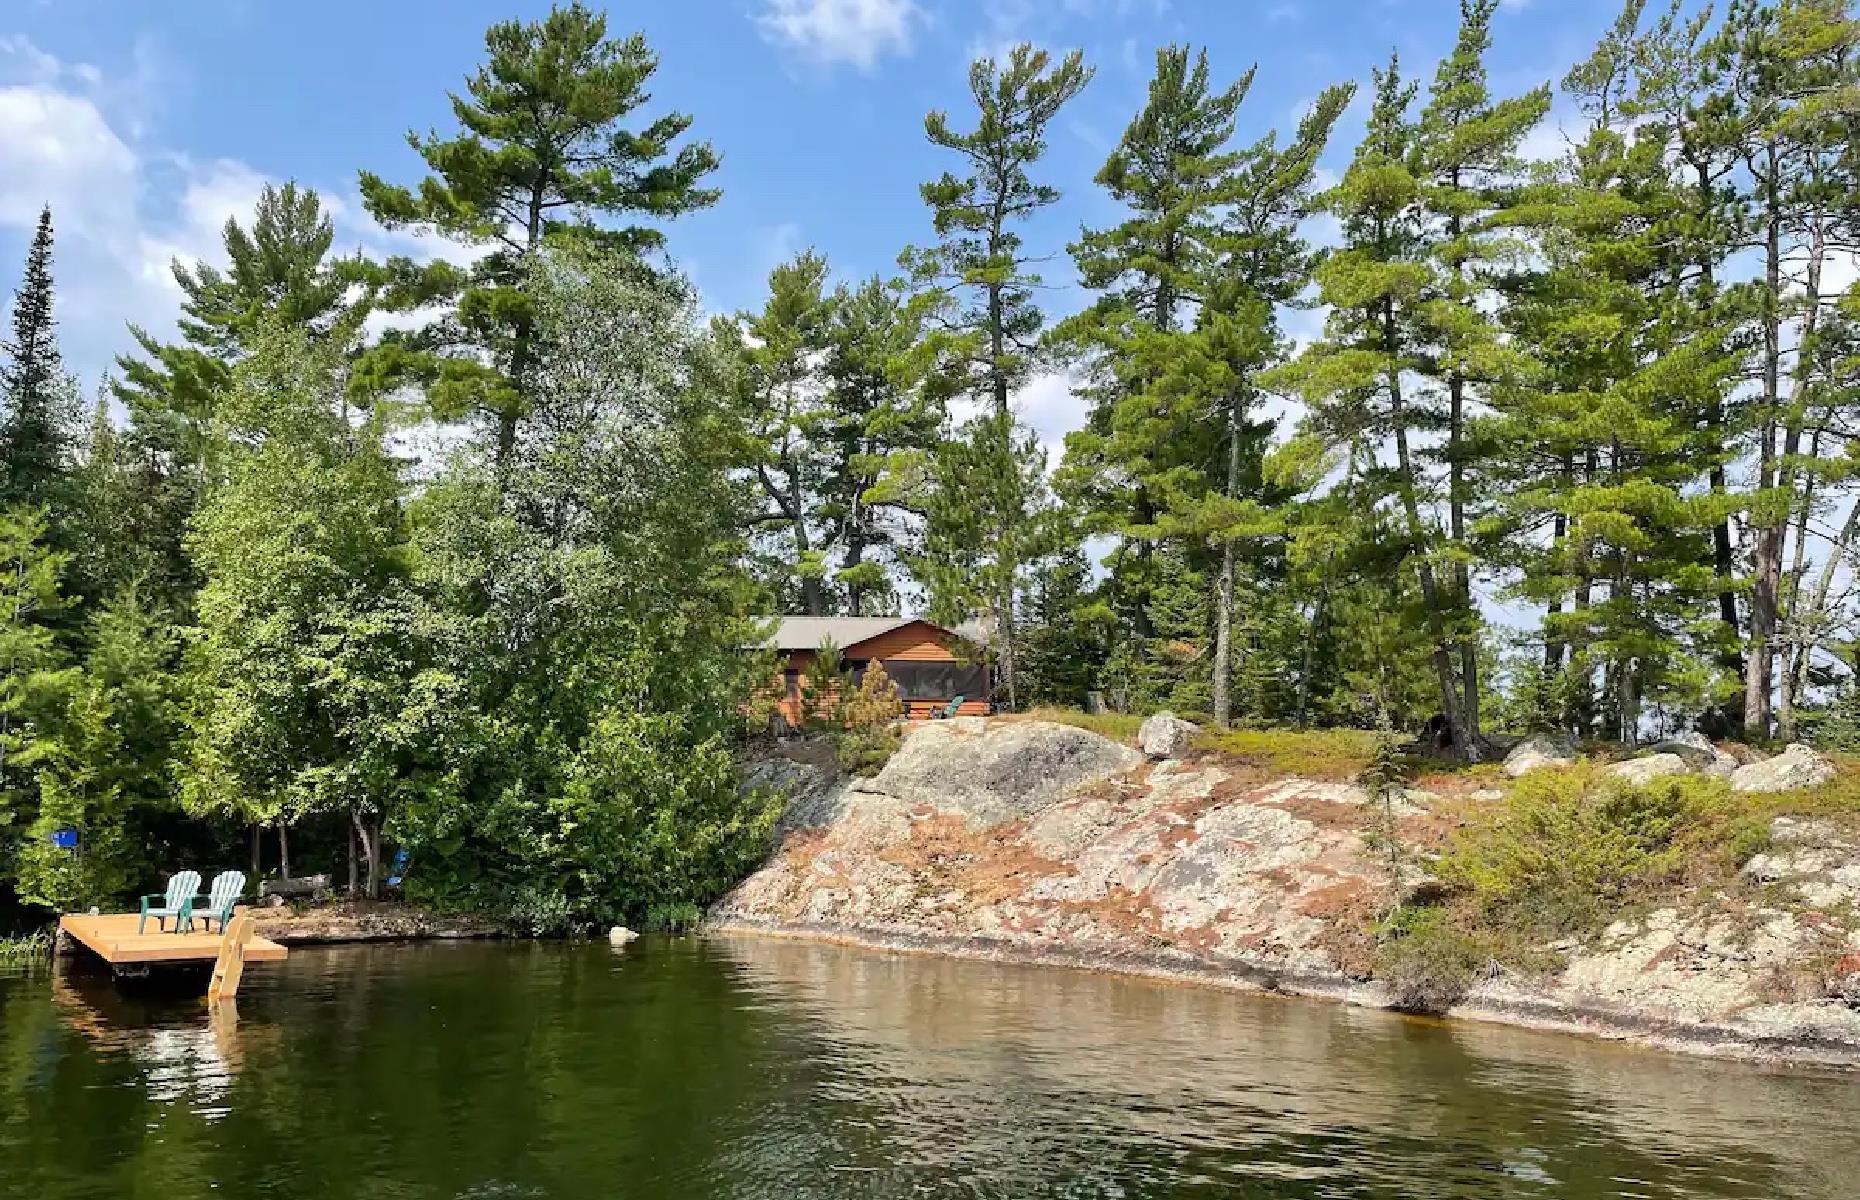 <p>Nym Island sits on its namesake lake in remote western Ontario. Located at the gateway to Quetico Park, this raw wilderness is favored by canoeists who want to immerse themselves in a quintessential central-Canadian adventure. This <a href="https://www.airbnb.co.uk/rooms/612284806617143763?adults=1&category_tag=Tag%3A675&children=0&infants=0&check_in=2023-05-18&check_out=2023-05-24&federated_search_id=995de101-3afa-4107-9679-c677bc012ed3&source_impression_id=p3_1662854465_anbwov2UKE212sXe">private six-person cabin</a> is appropriately rustic with voyageur-inspired details and a lakefront fire pit and private dock, perfect for watching the sunset or the impossibly dark night sky.</p>